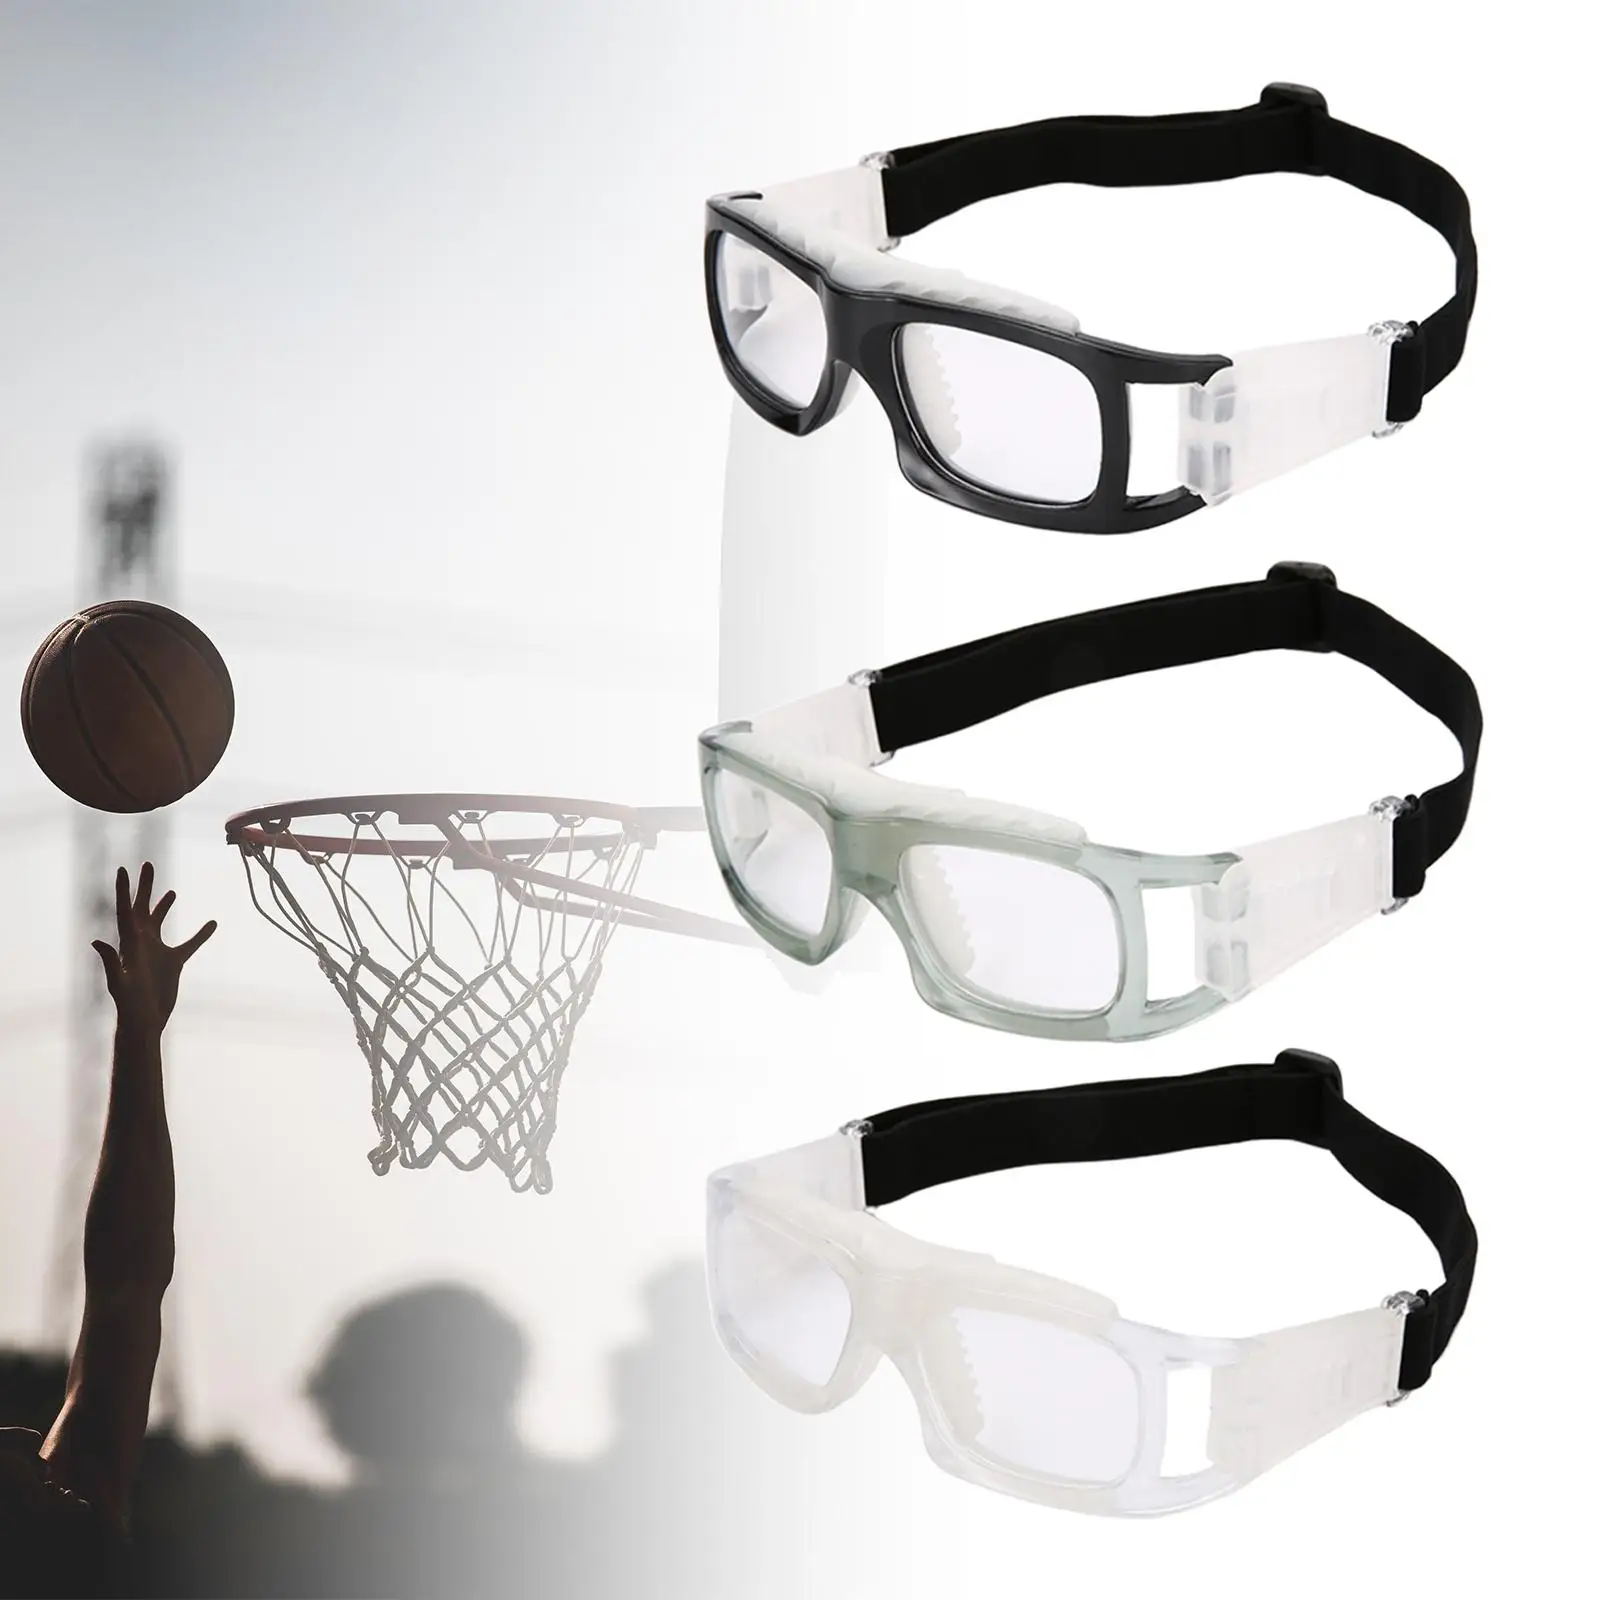 Basketball Glasses Ventilate Sweat with Elastic Adjustable Head Band Sports Eyewear Wearable Sports Goggles for Hiking Adults